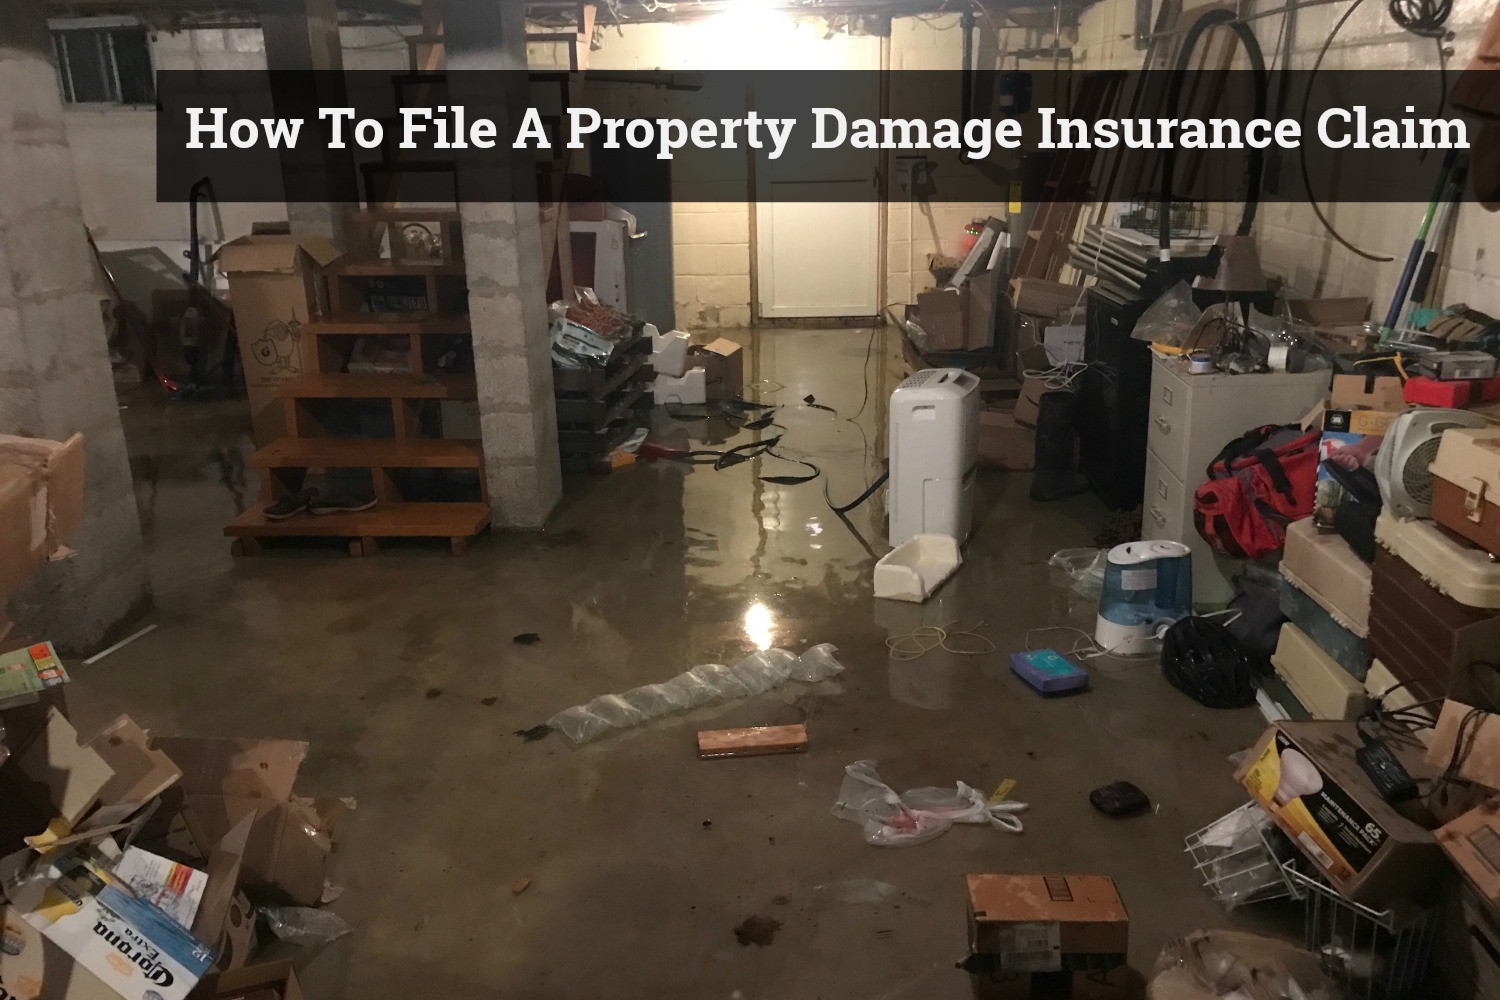 How To File a Property Damage Insurance Claim